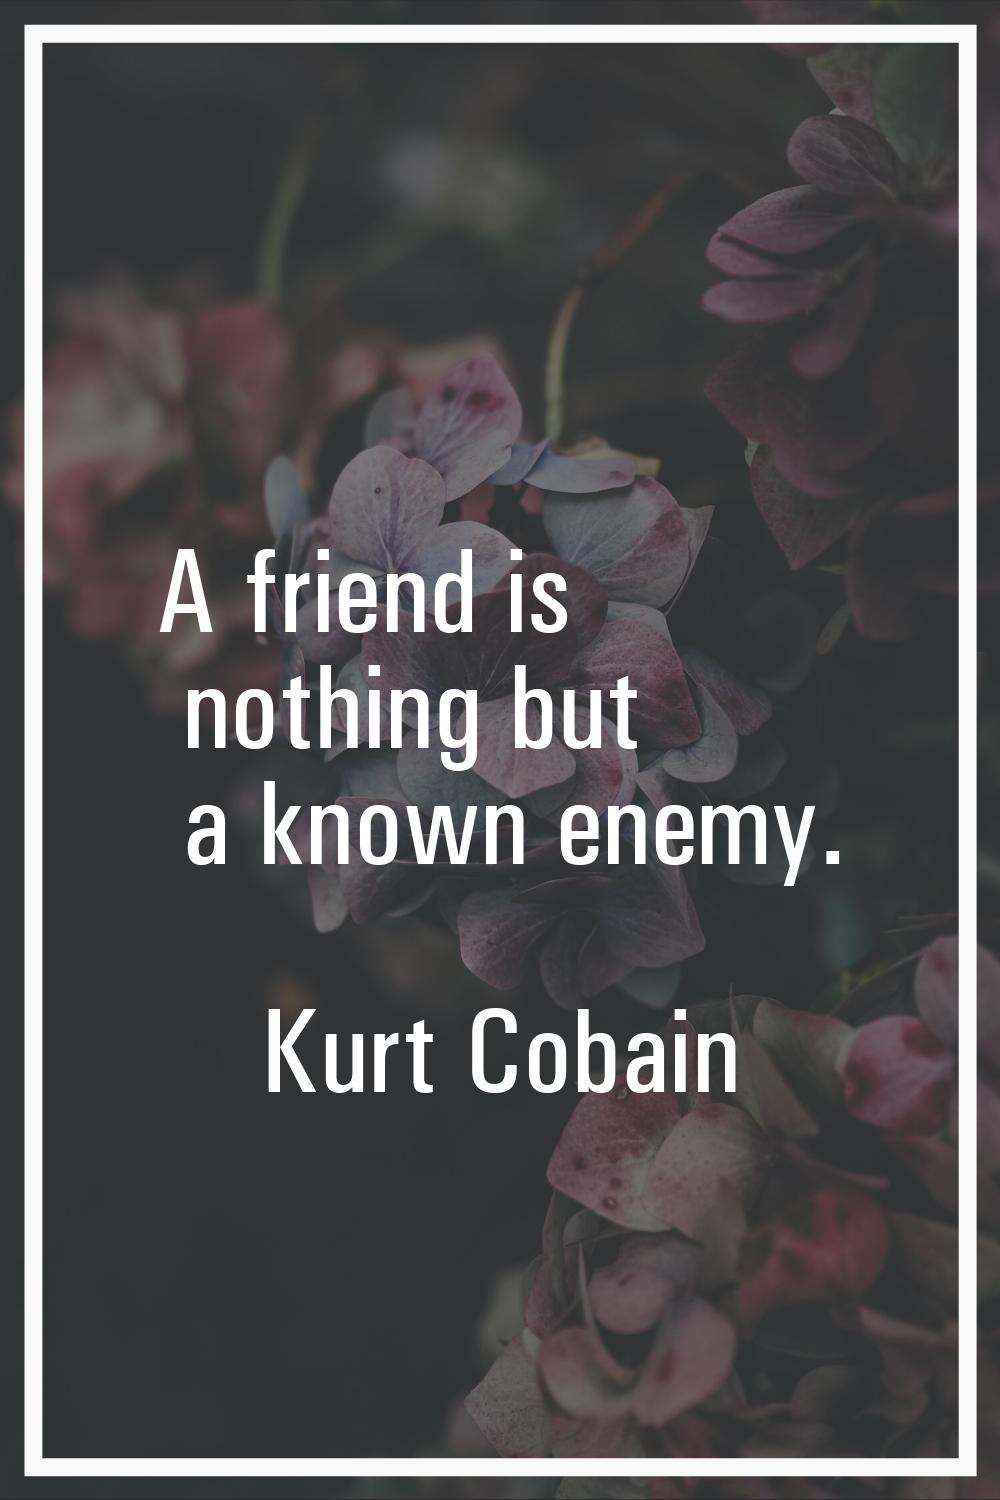 A friend is nothing but a known enemy.